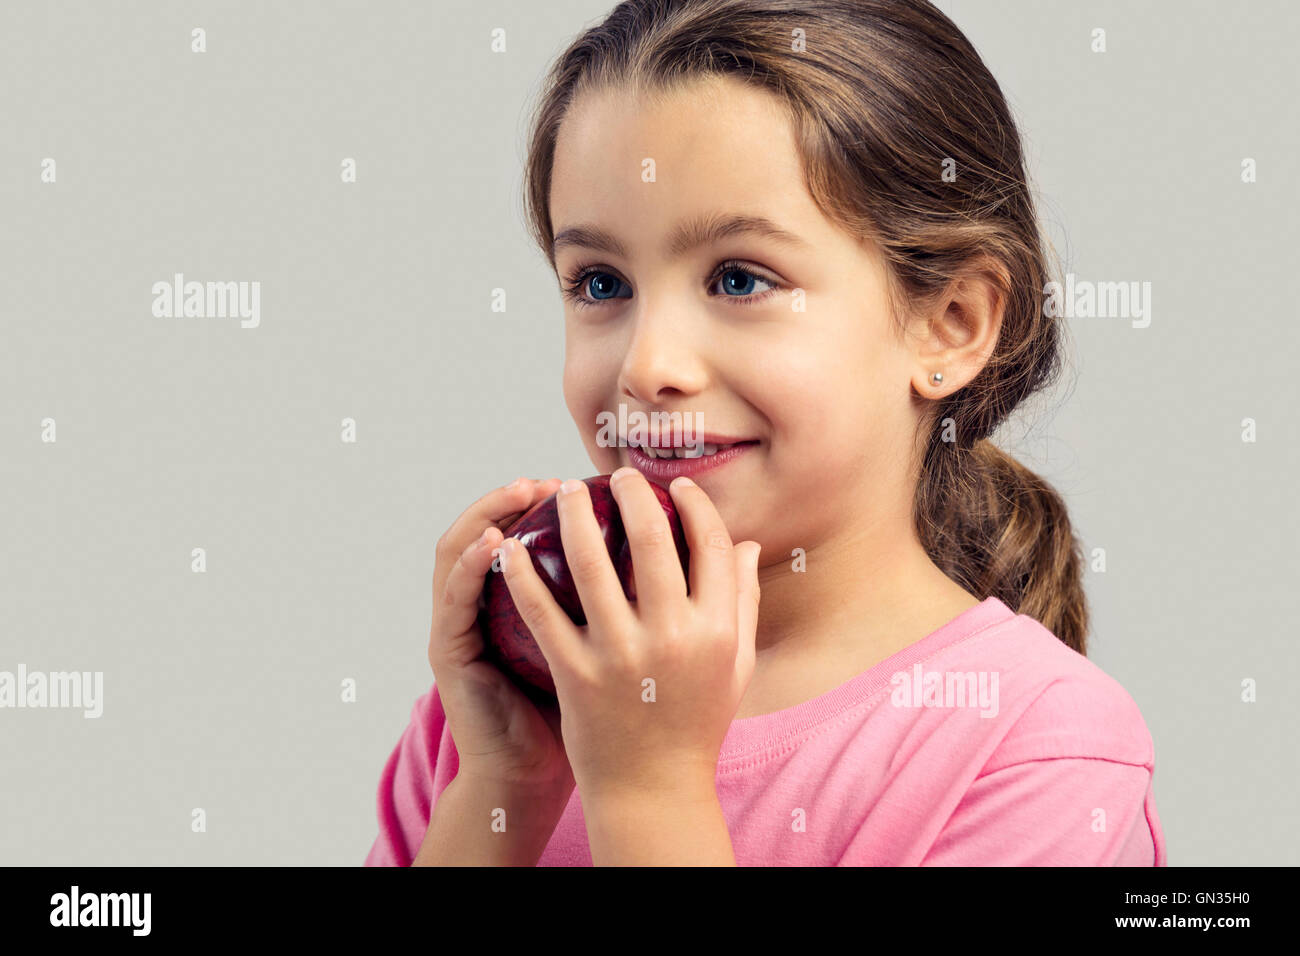 Studio portrait of a beautiful little girl holding a fresh red apple Stock Photo